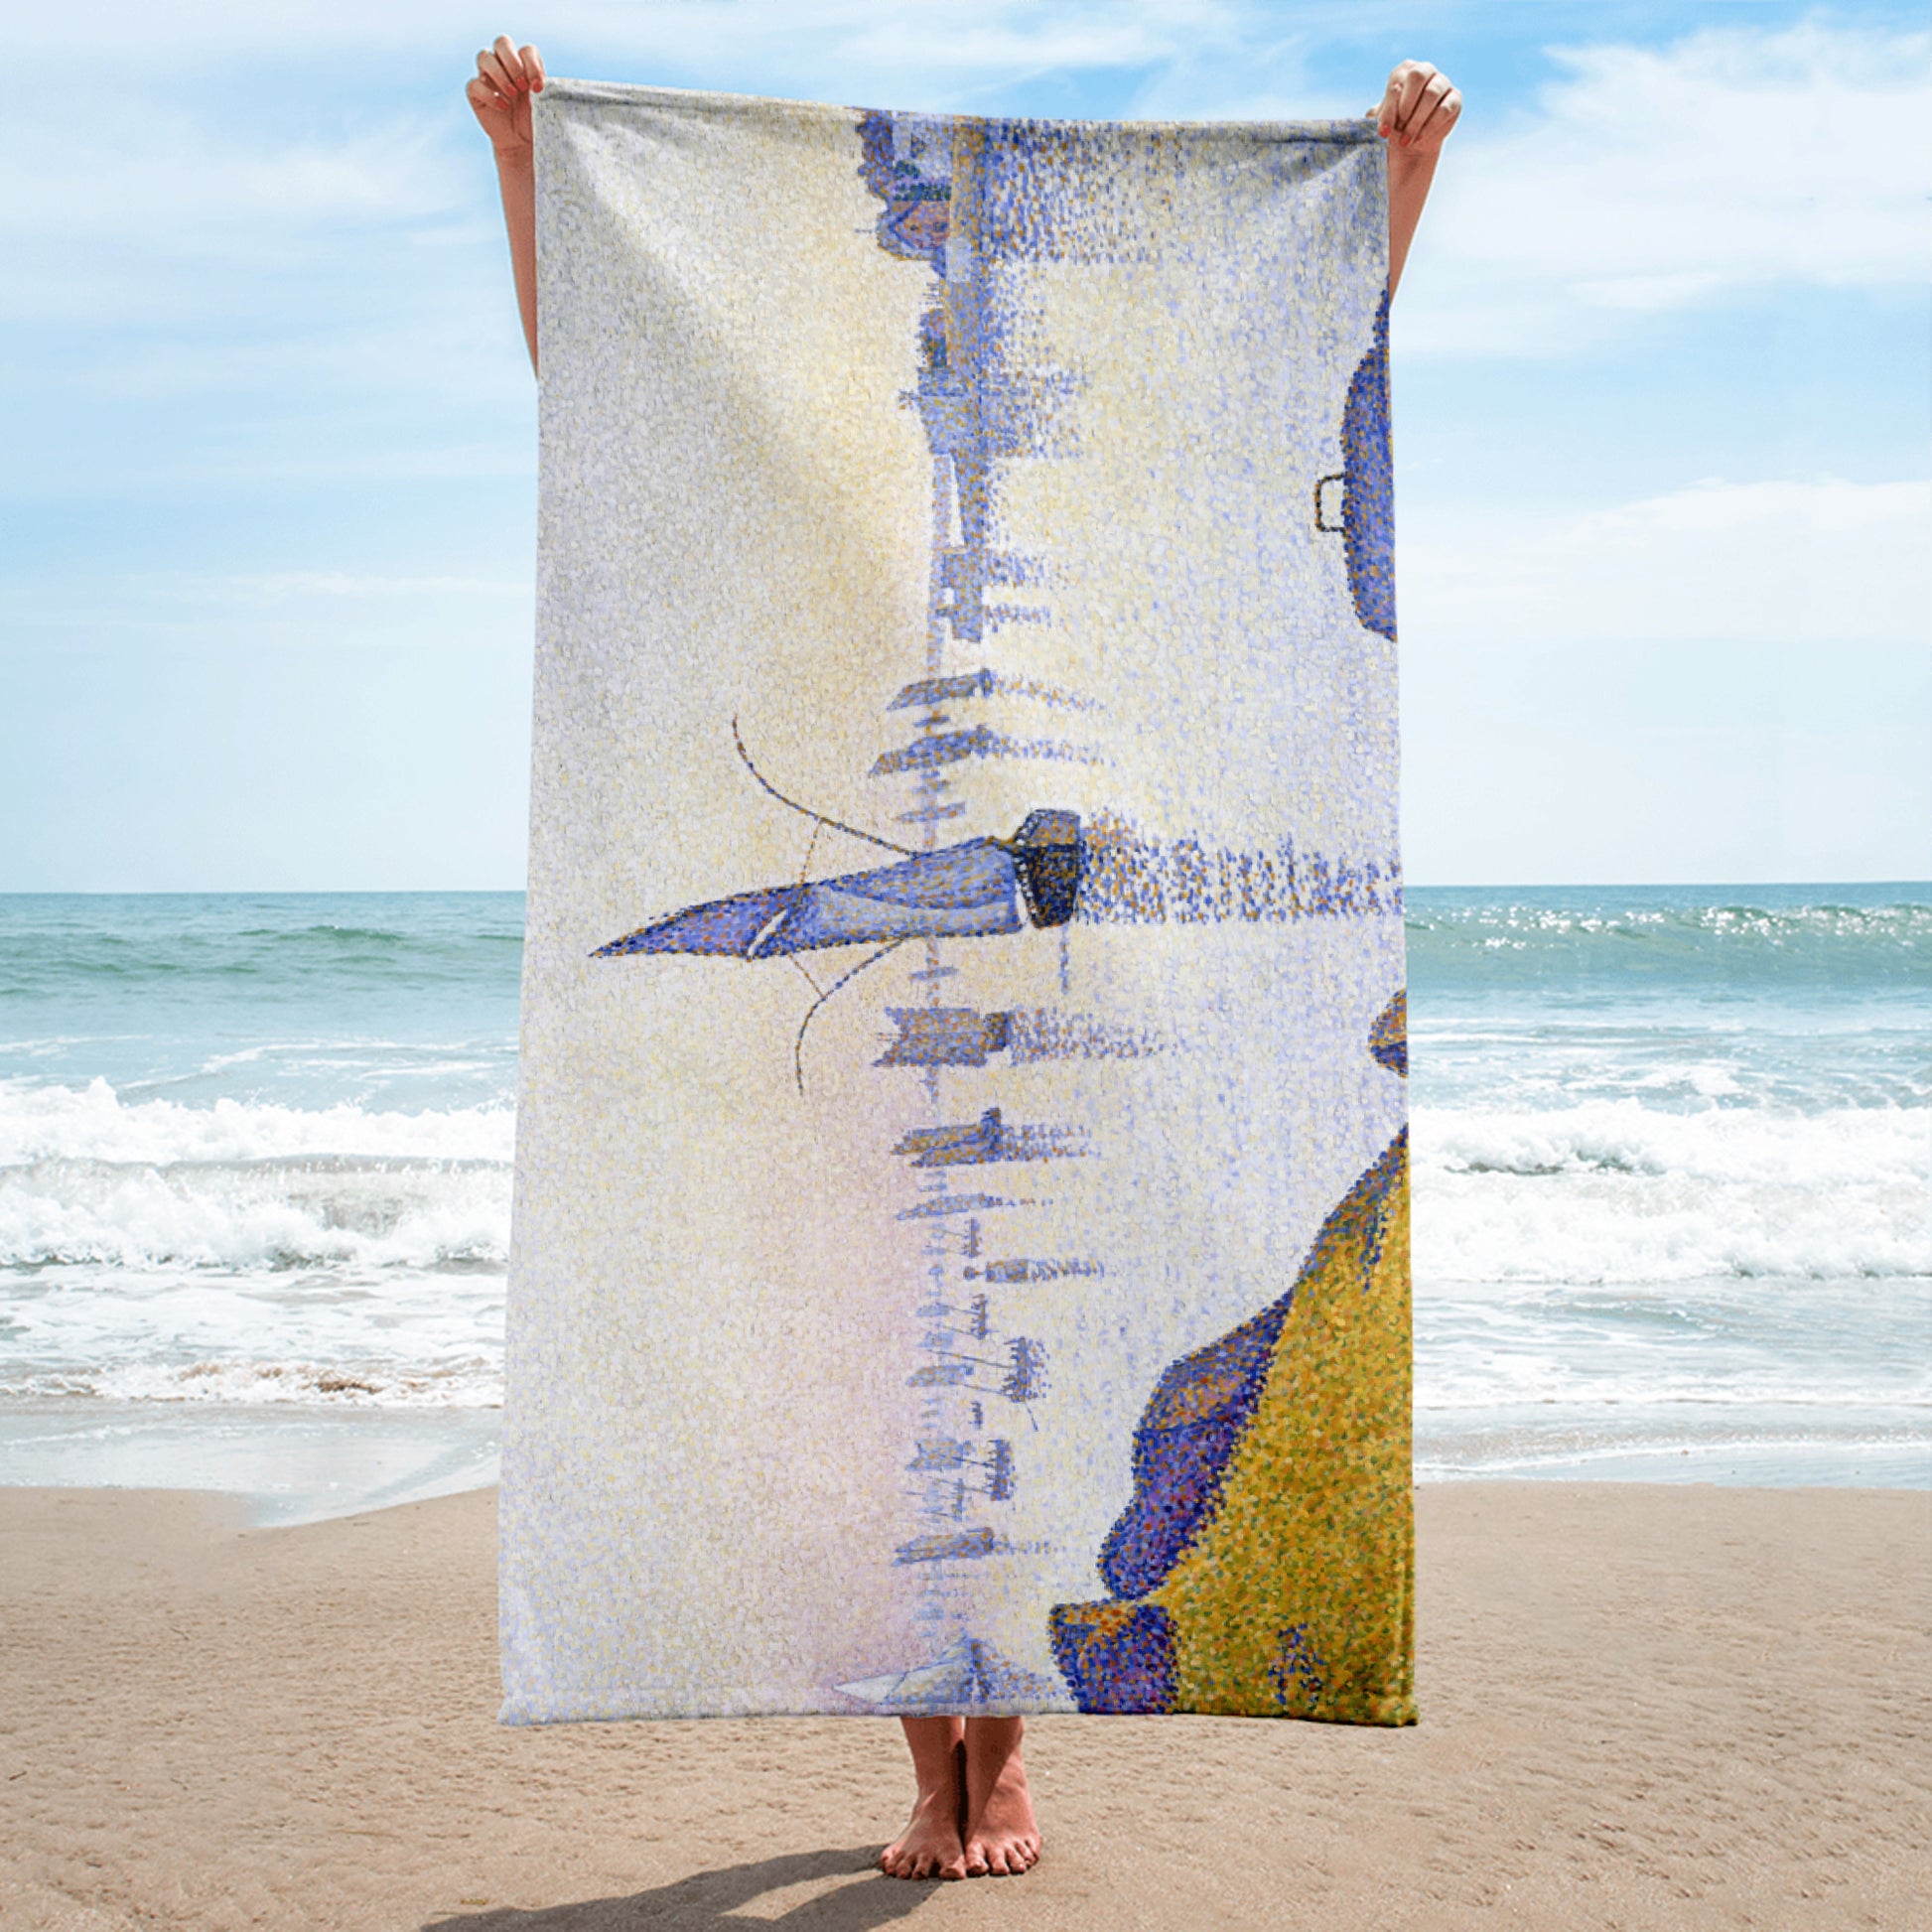 Woman on beach holding up a beach towel featuring painting 'Evening calm, Concarneau' by Paul Signac